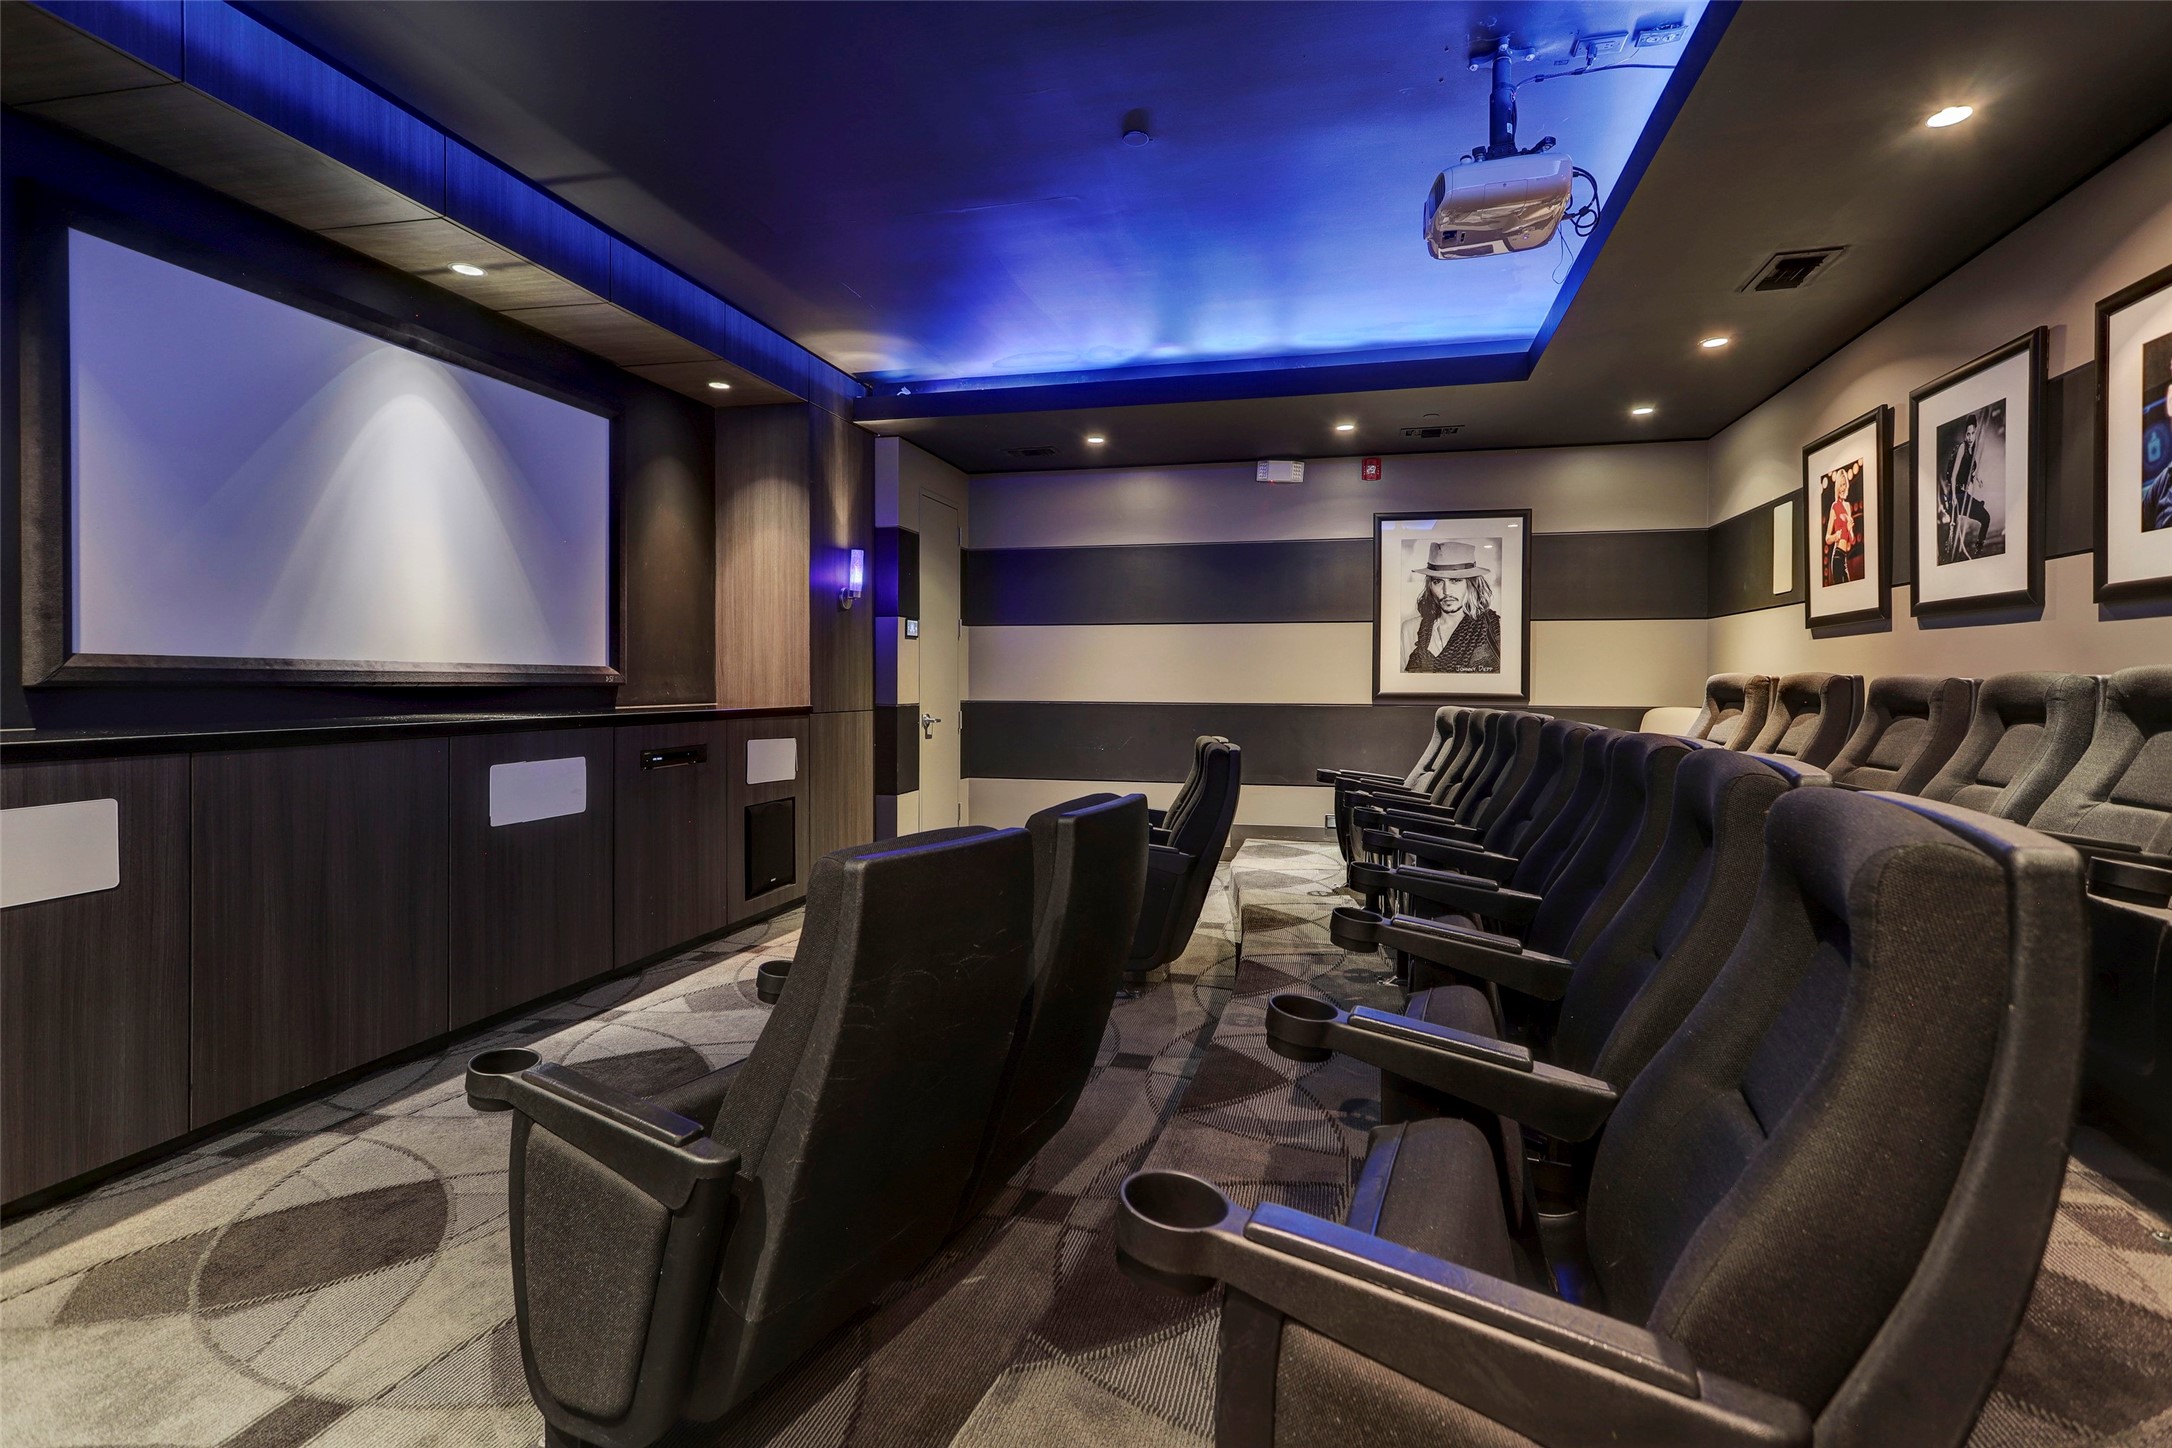 The theater room can hold up to 20 guests. Reserve it to host a movie night or any sporting event.